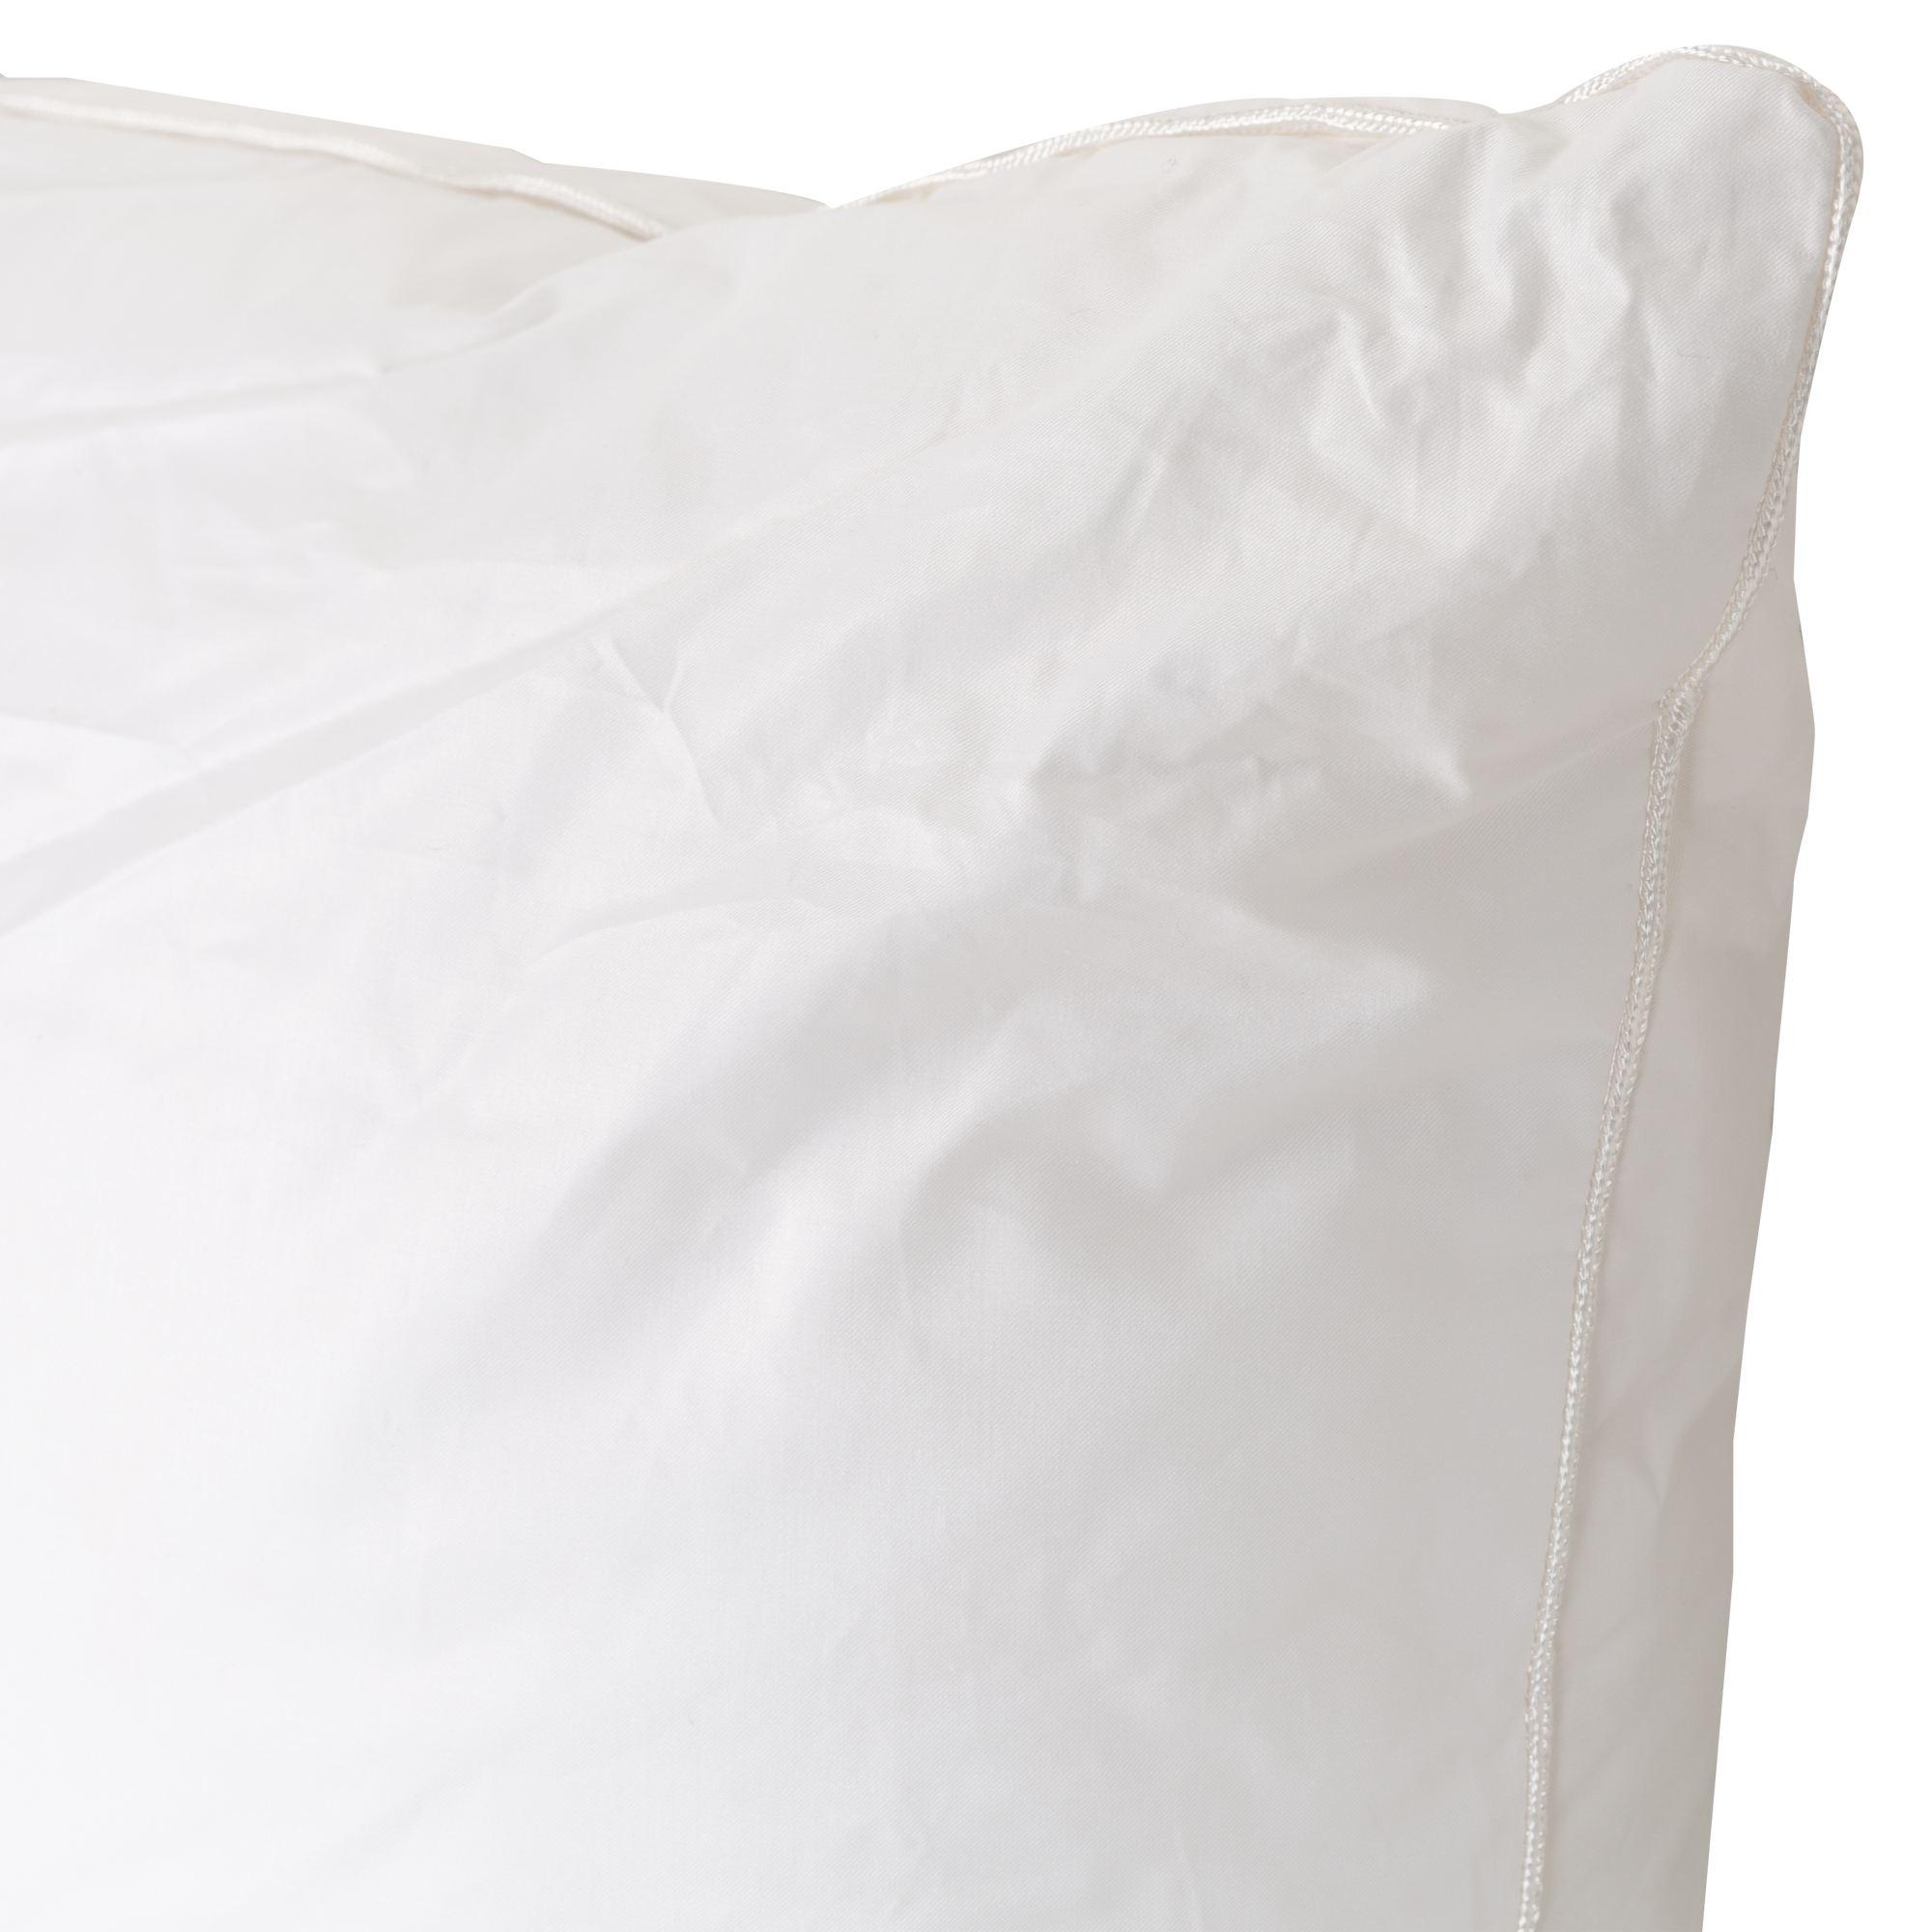 The Ziegler pillow is filled with a high-quality Polish goose down that is noted for its high loft and incredible warmth.